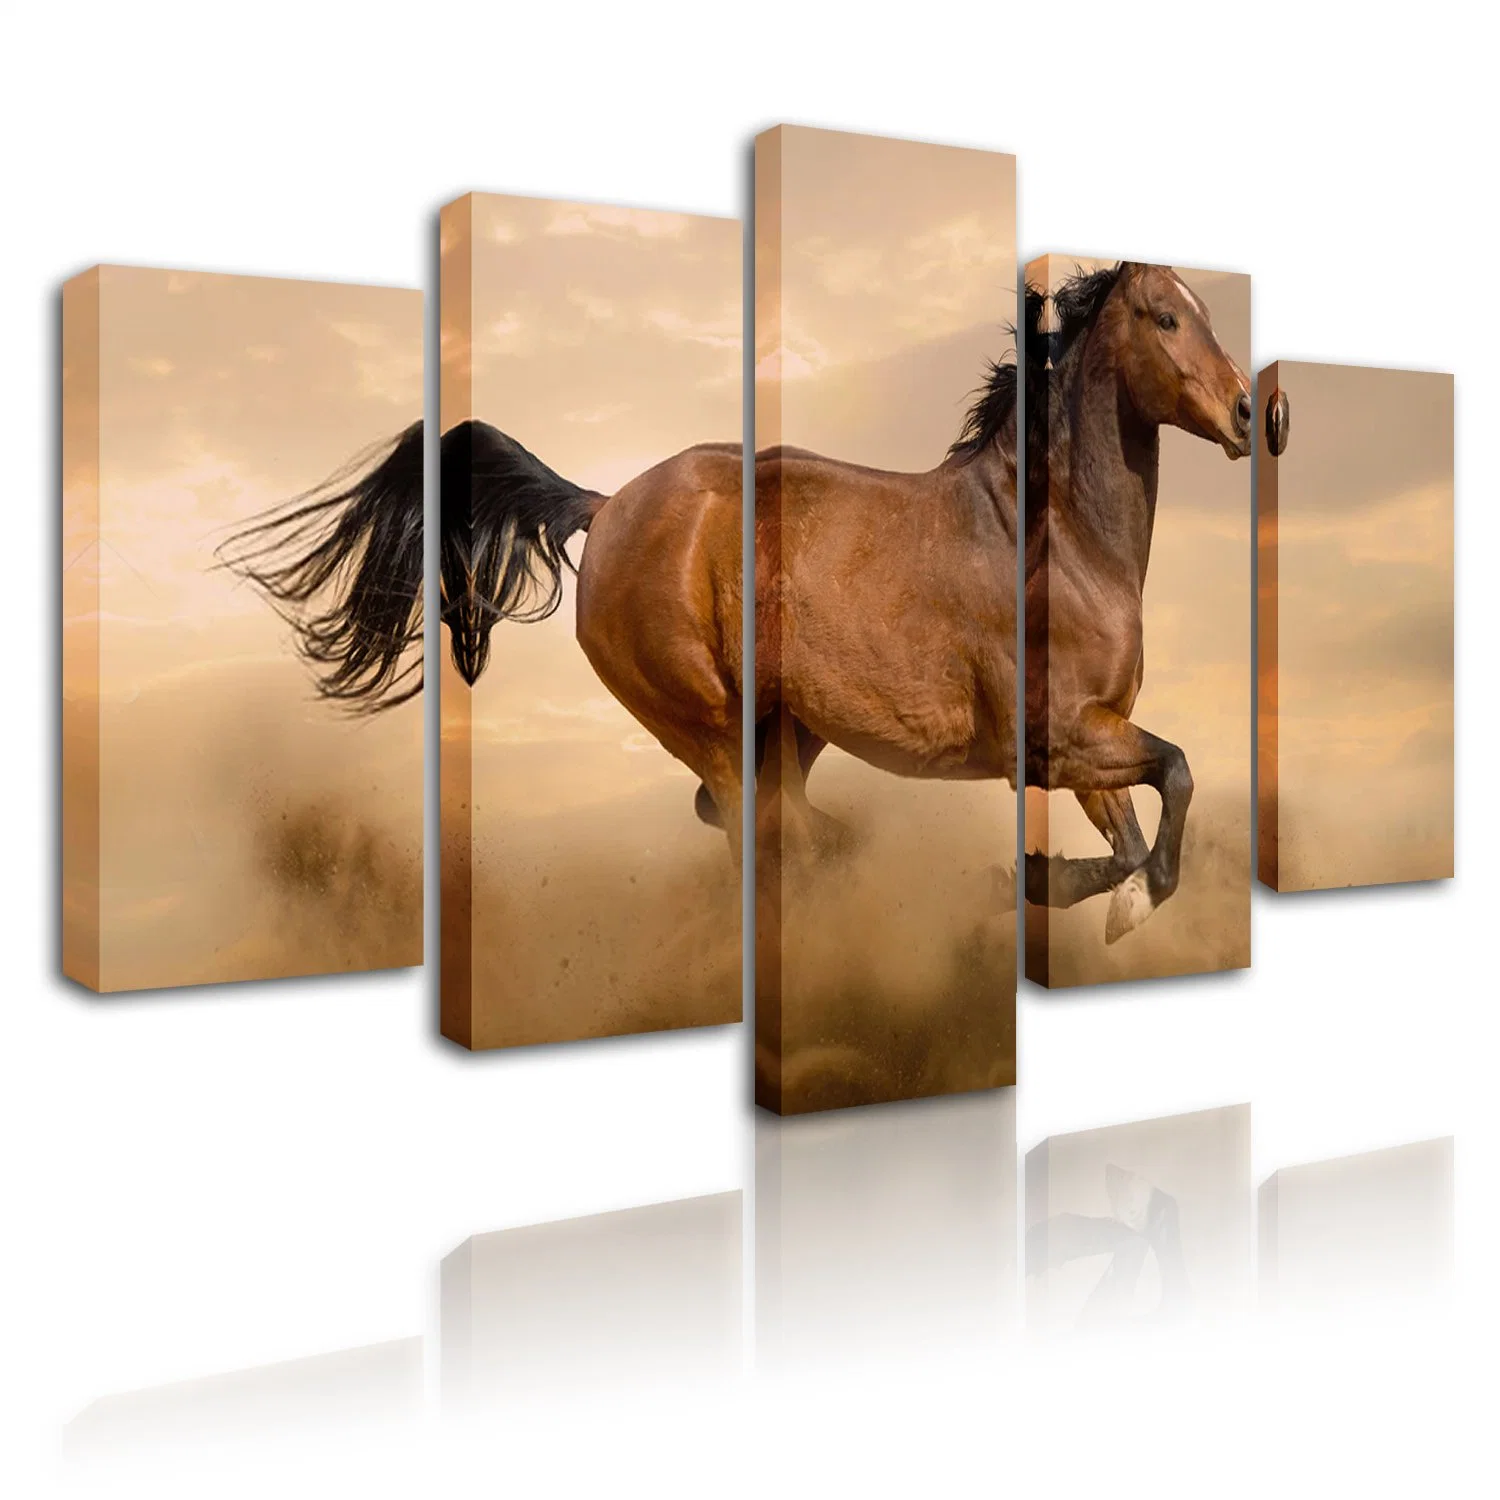 Oil Art Wall Picture Abstract Portrait Living Room Beauty Beautiful Animal Horse Painting